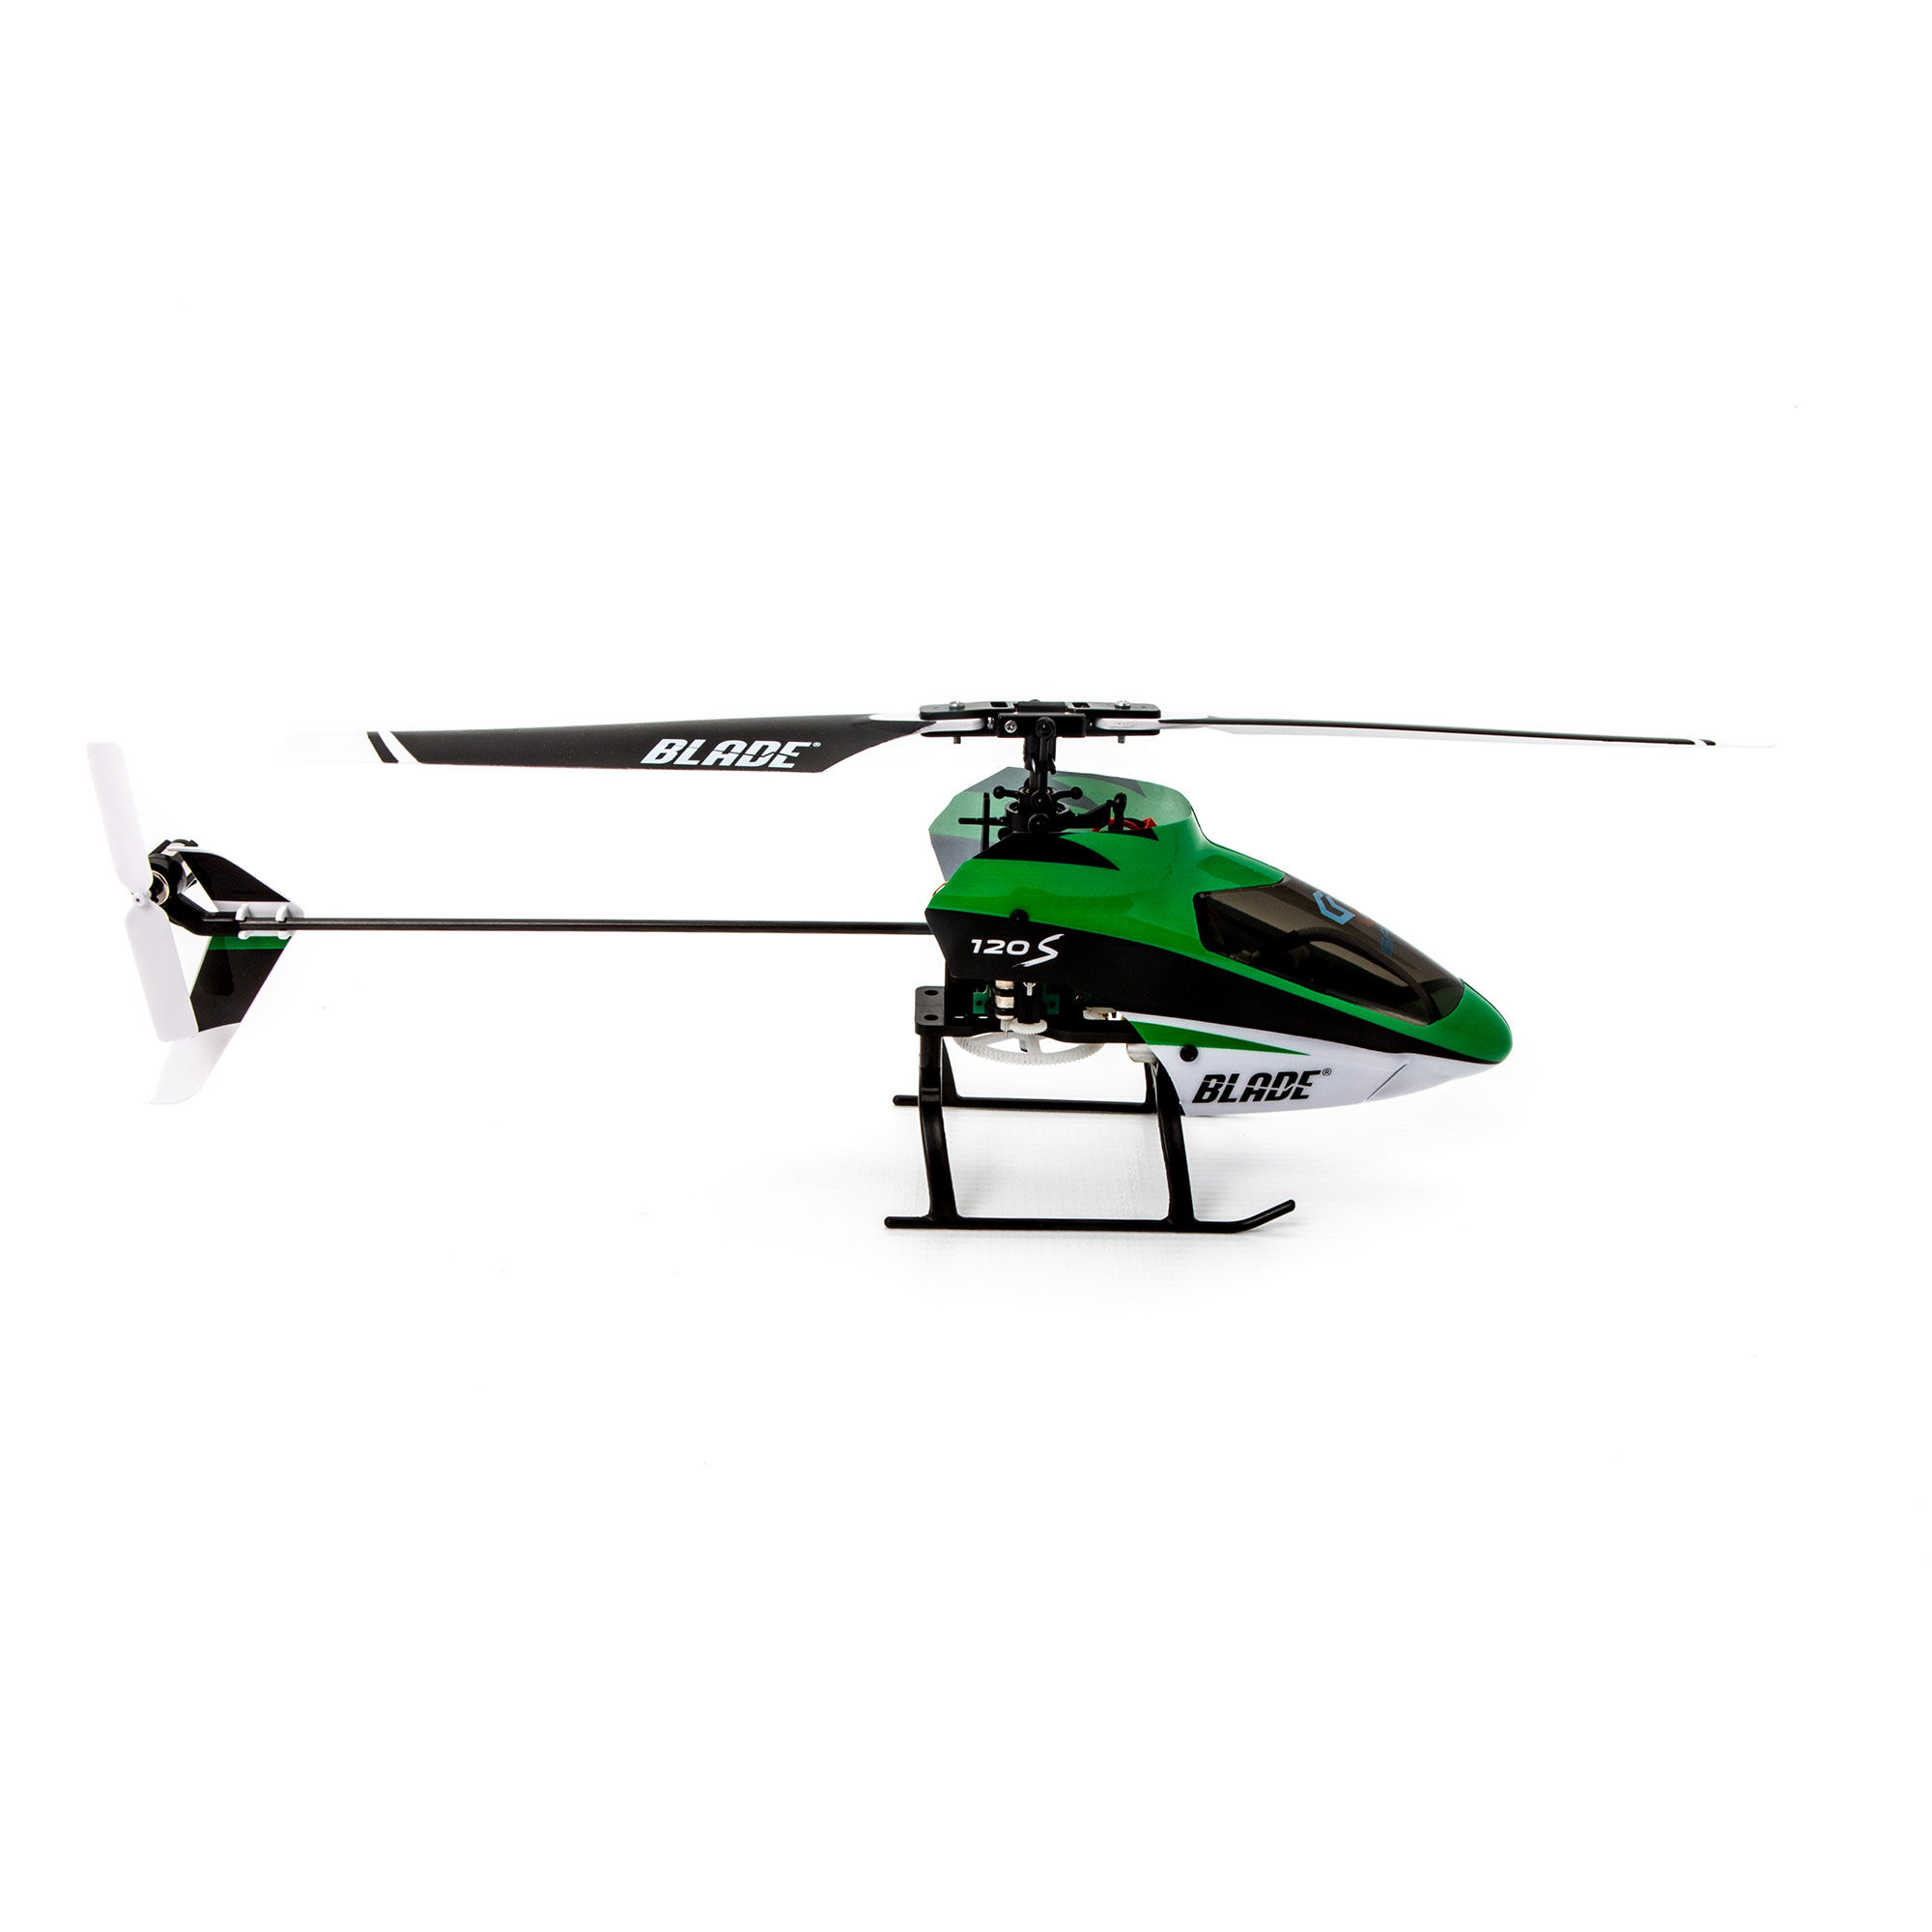 Blade 120 S RTF Sub-Micro Helicopter w/ SAFE Technology Battery/Chg BLH4100 